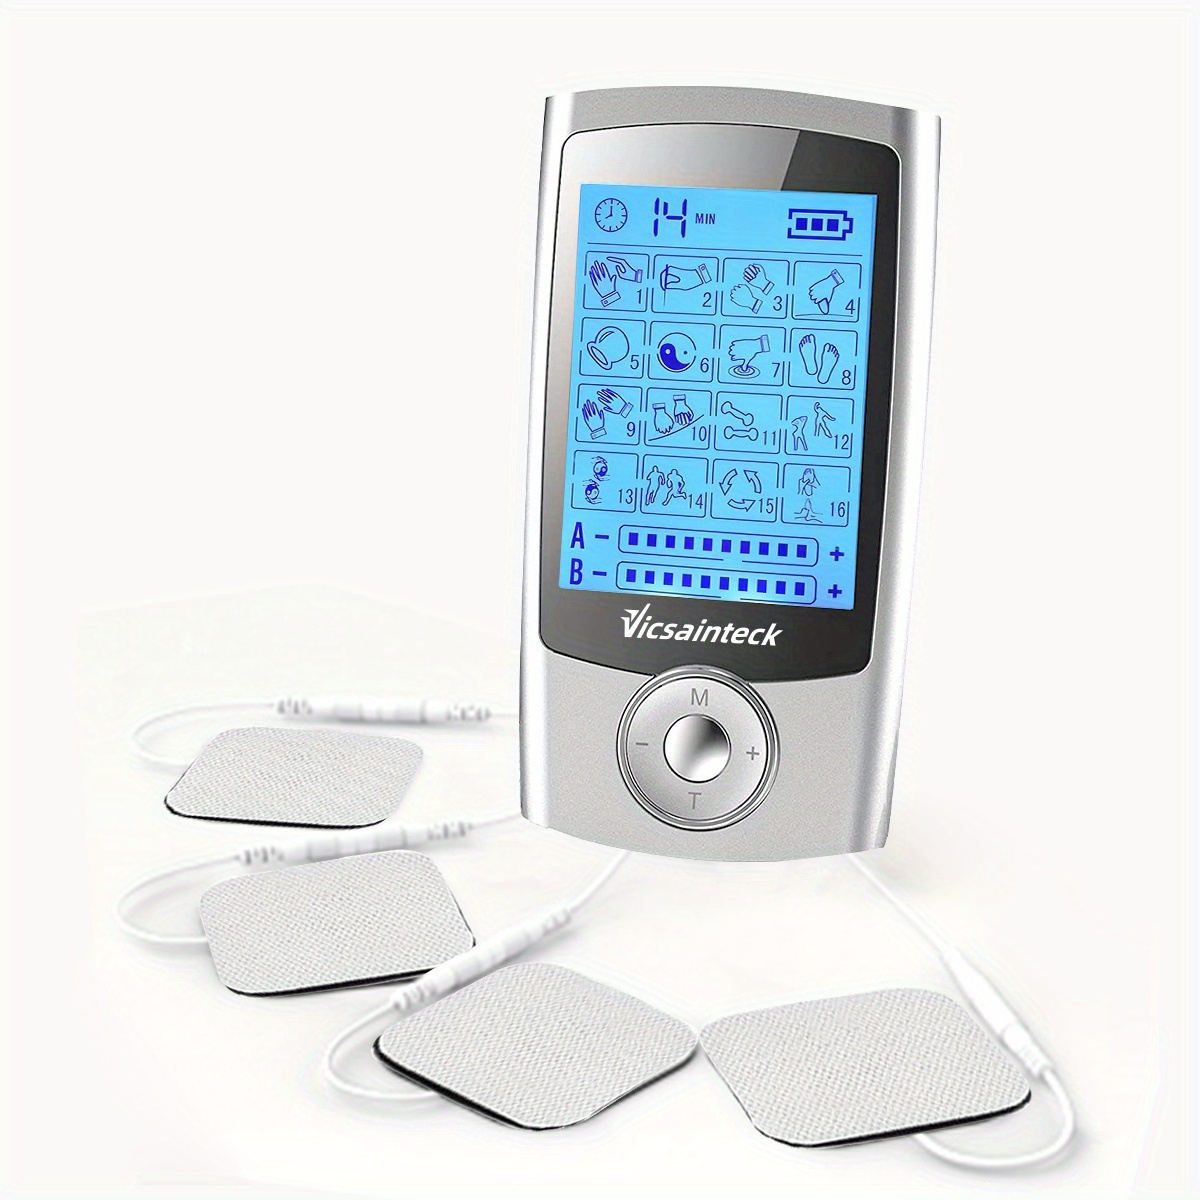 Intensity at Home Tens Unit Muscle Stimulator